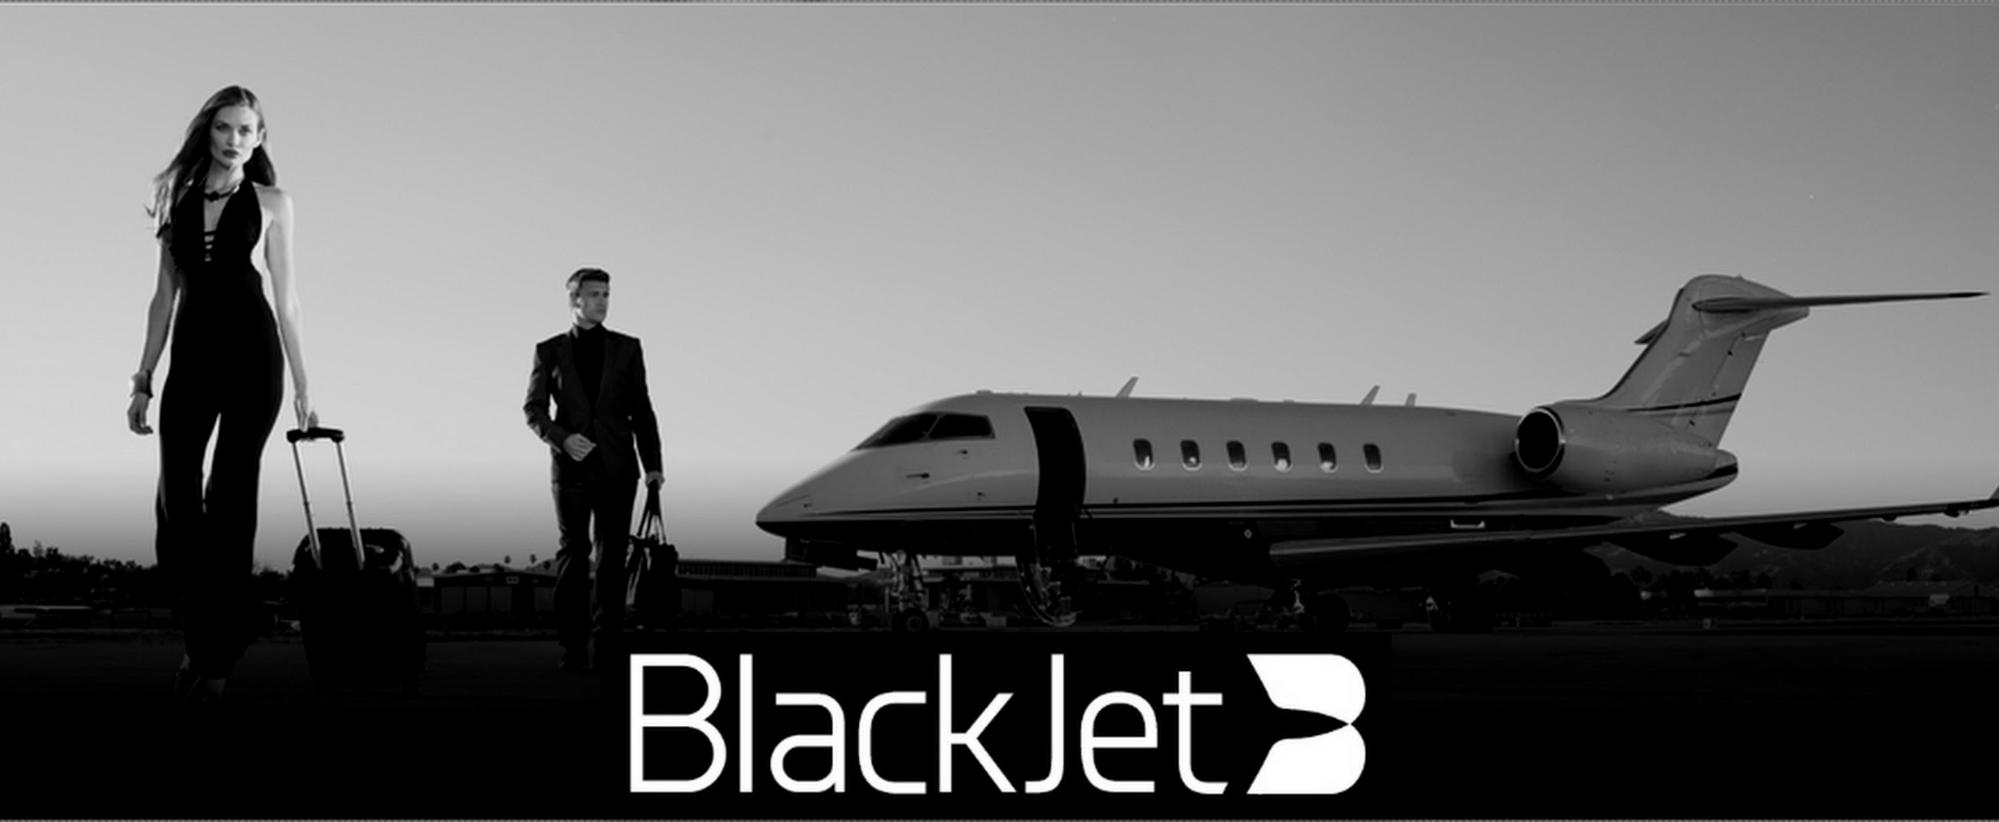 Blackjet photo in airport with logo